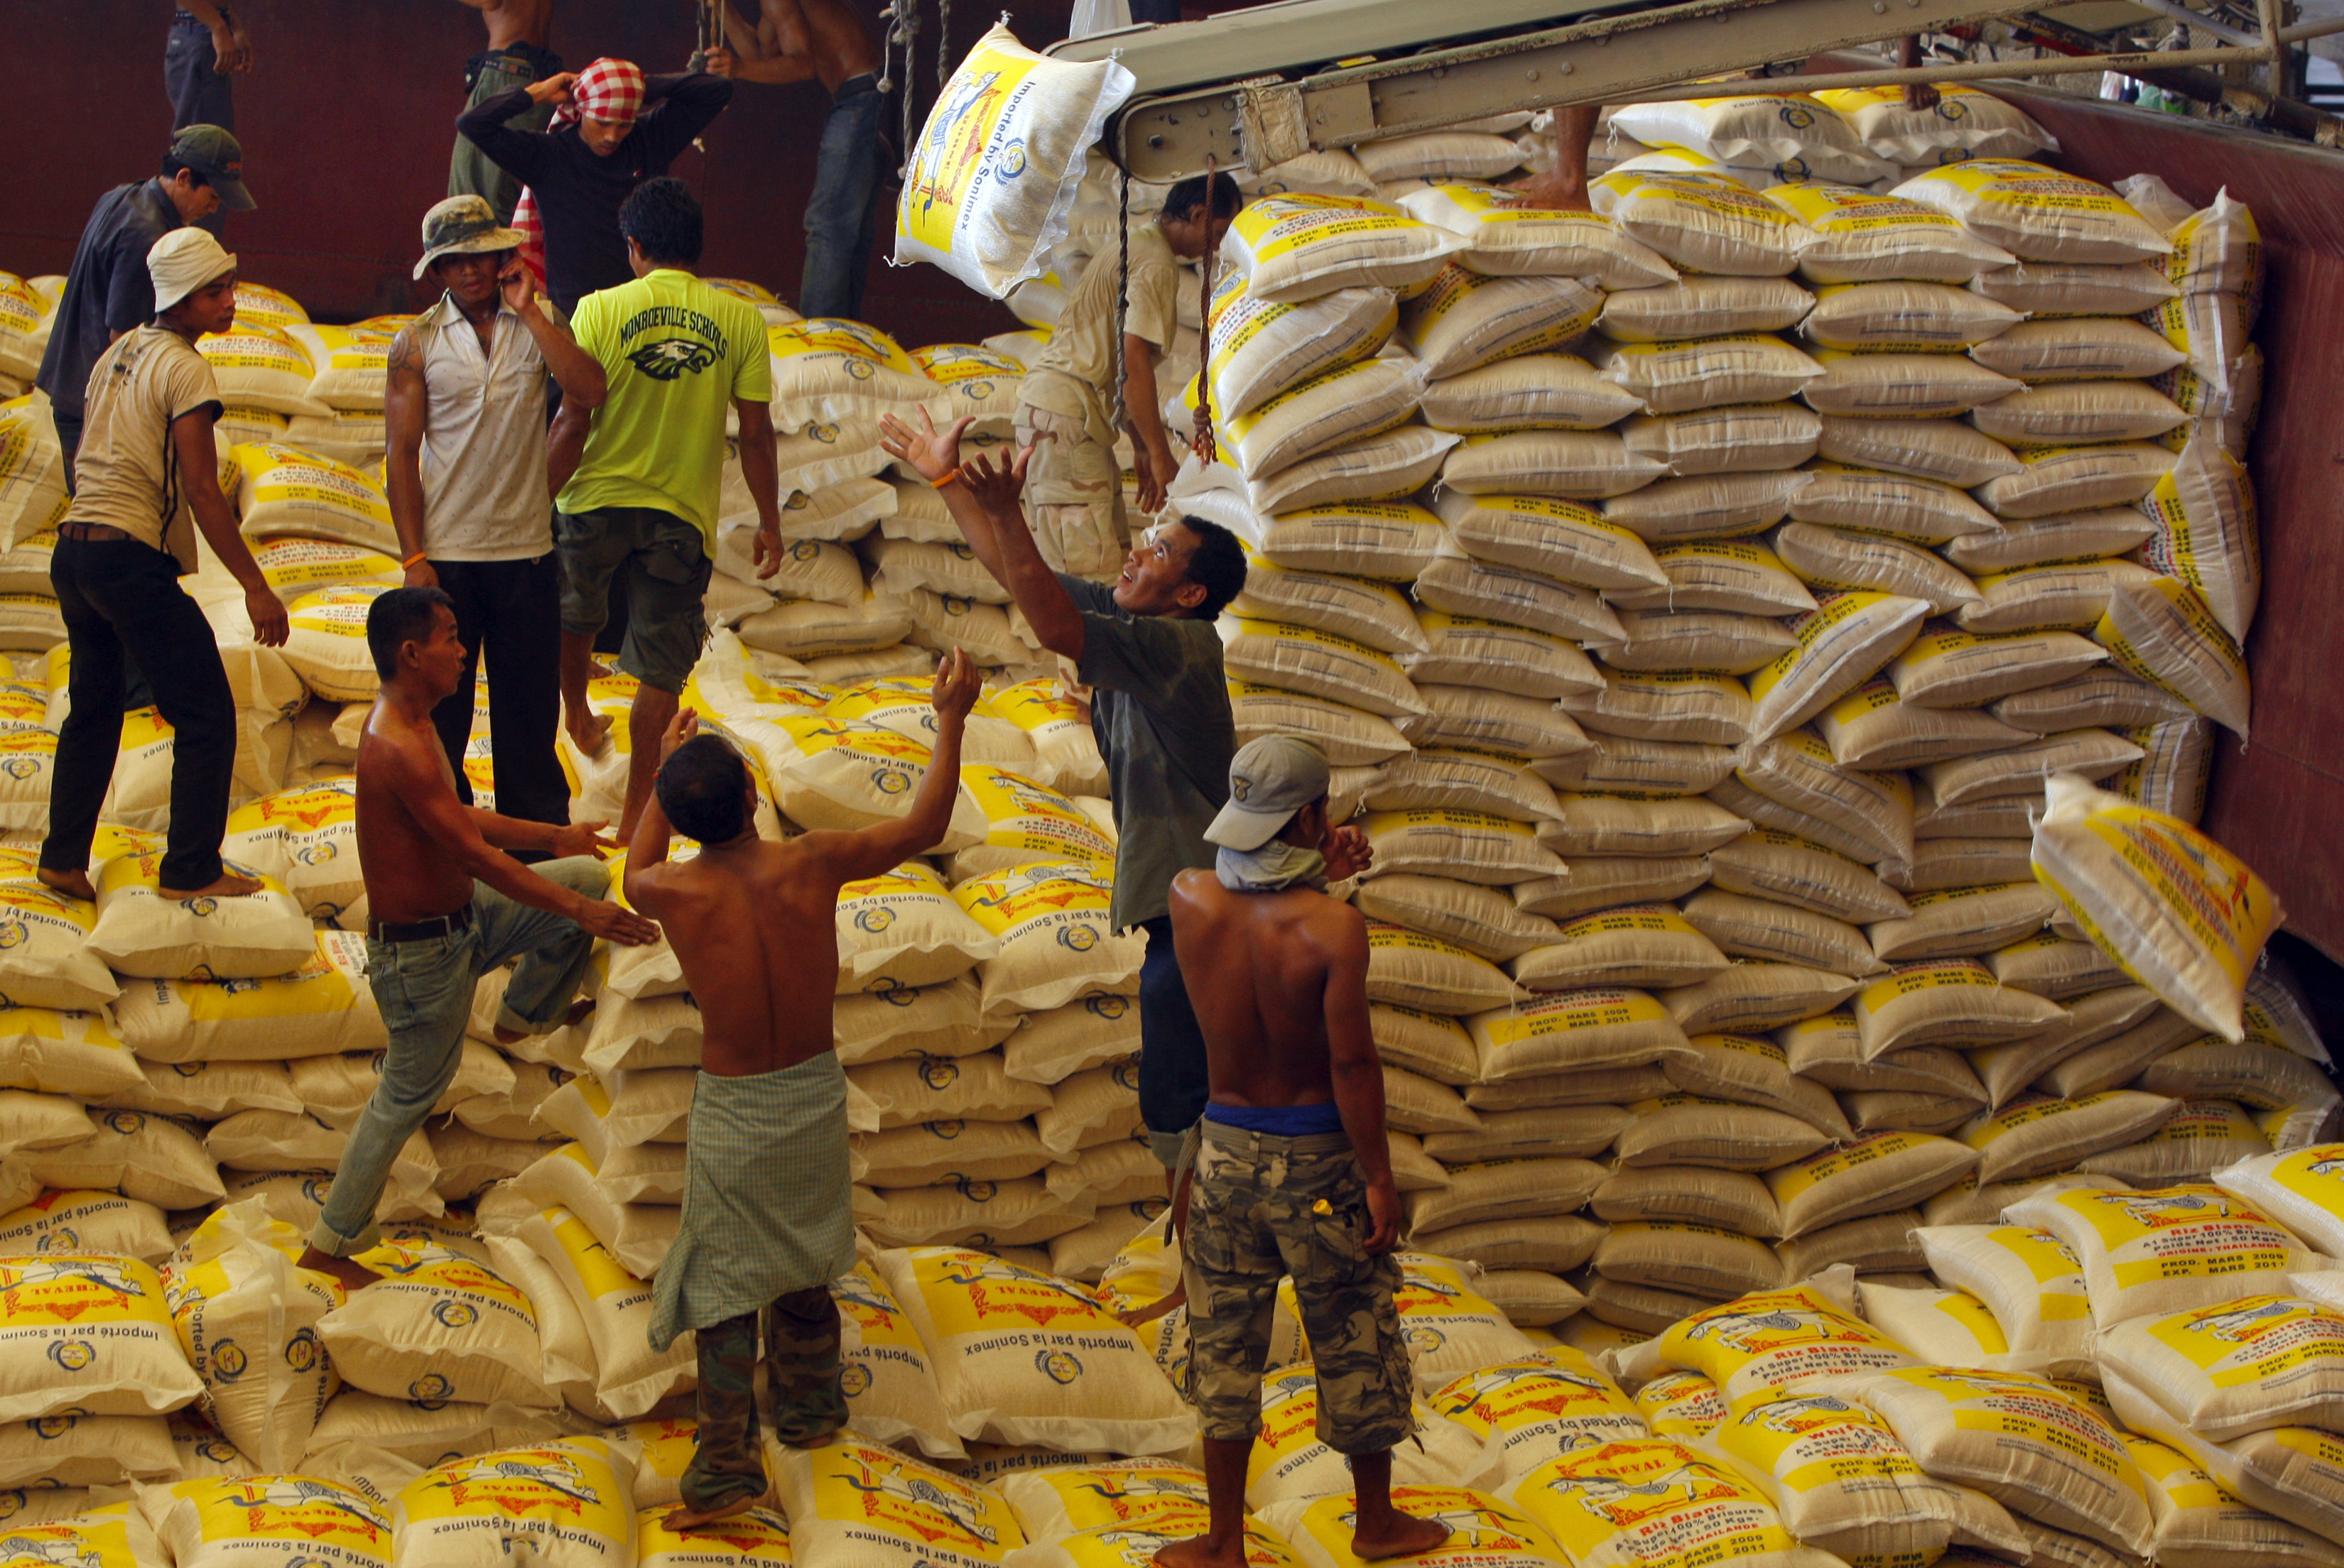 BANG PAKONG, THAILAND - MARCH 11: Workers load a ship with 1000 tons of rice bound for Africa at the Asia Golden Rice export company on March 11, 2009 in Bang Pakong, Thailand. The rice export company is getting a lot of orders from Africa and U.A.E so is surviving in the financial crisis. Exports in Thailand have taken a hit from the global financial meltdown with Thailand's rice exports falling 37.74 percent year-on year in terms of volume according to the Commerce ministry. The country shipped only 628,792 tons of rice valued at USD331 million compared with 1.01 million tons last year valued at USD421 million and overall the country's exports for 2009 are expected to decline 10 percent. Unemployment is another major problem as the new school graduates start looking for work this summer and if layoffs continue the number of jobless will be as high as 1.3 million. (Photo Paula Bronstein/Getty Images)